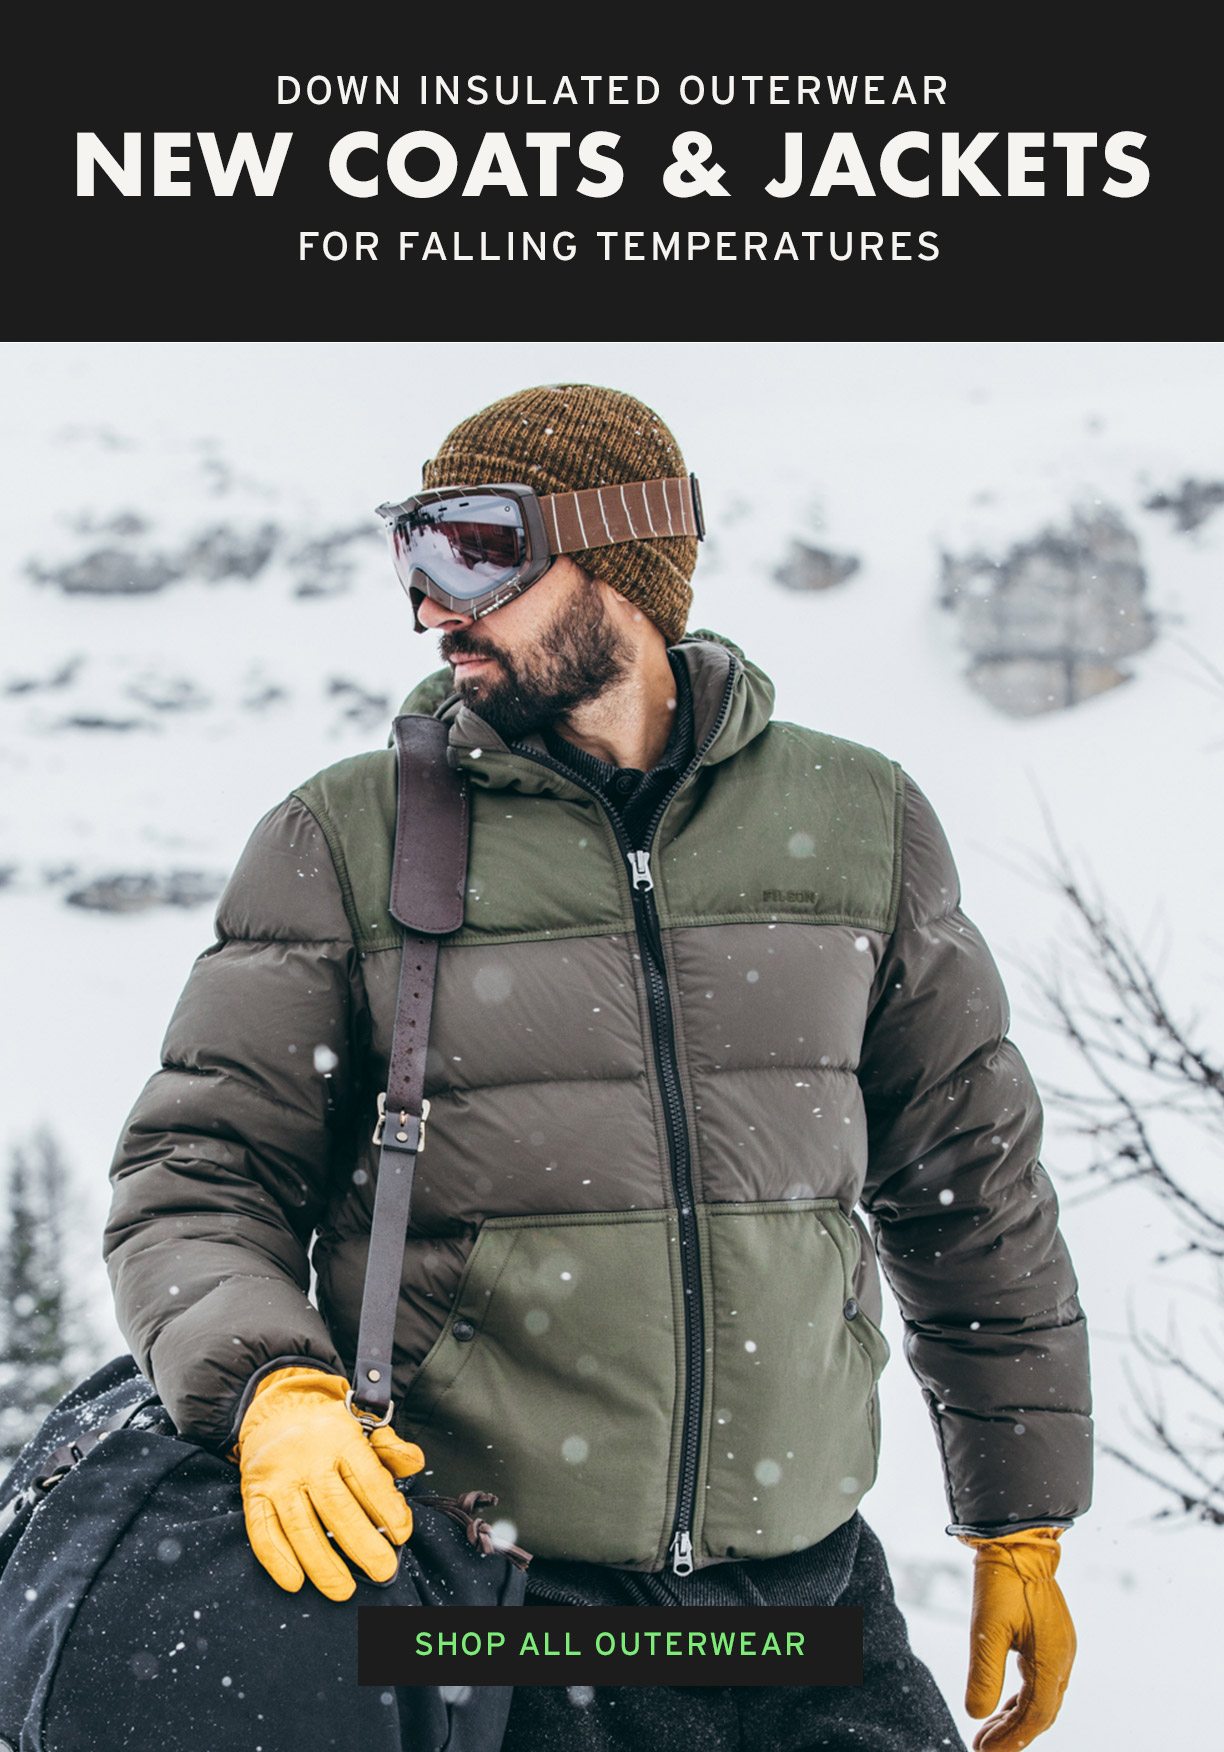 DOWN INSULATED OUTERWEAR. NEW COATS & JACETS. SHOP OUTERWEAR